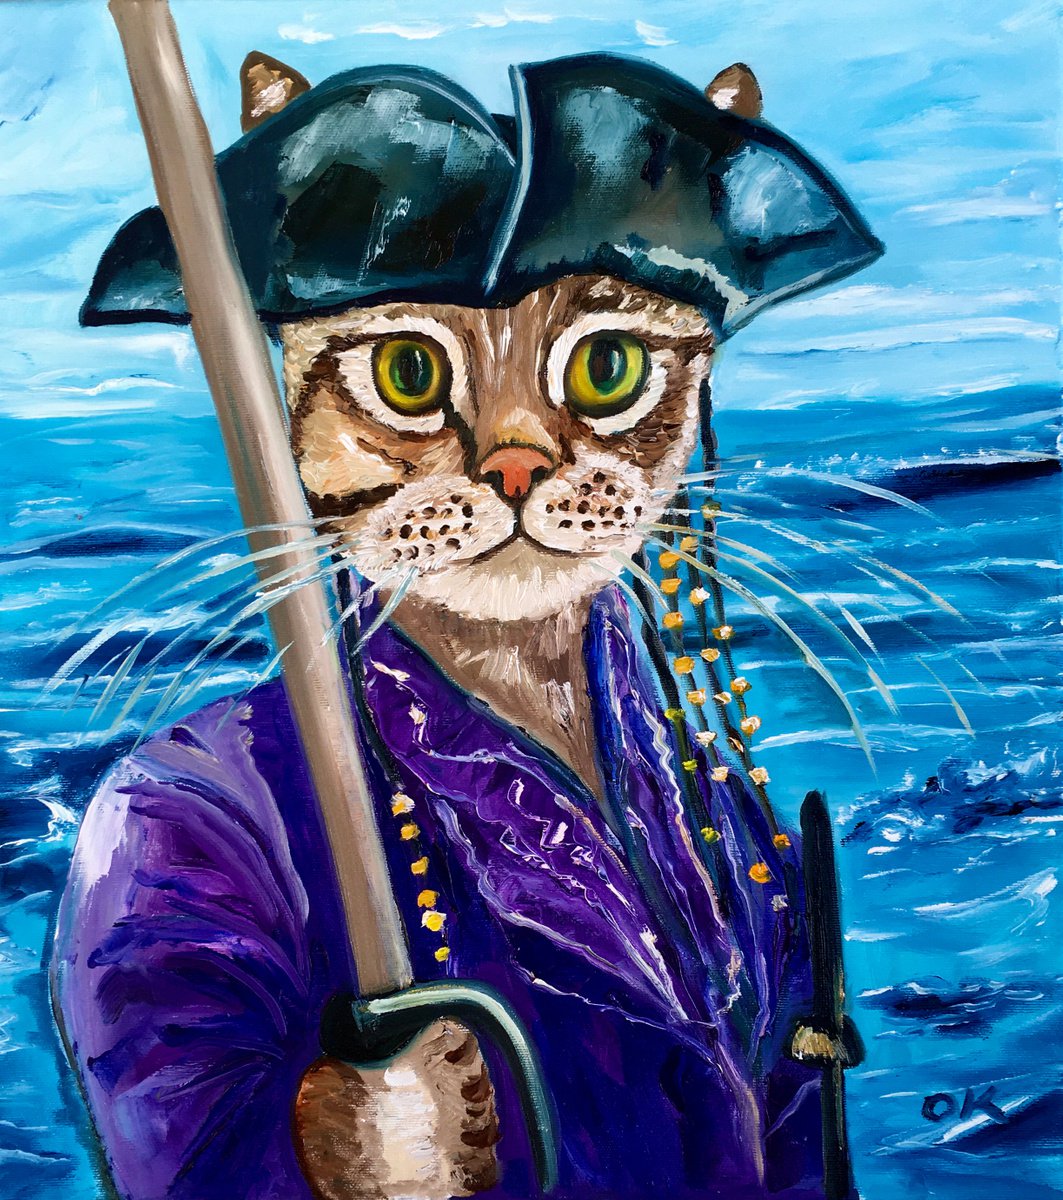 Troy The Cat Pirate of the Caribbean , Cat Pirate, original oil painting, portrait by Olga Koval